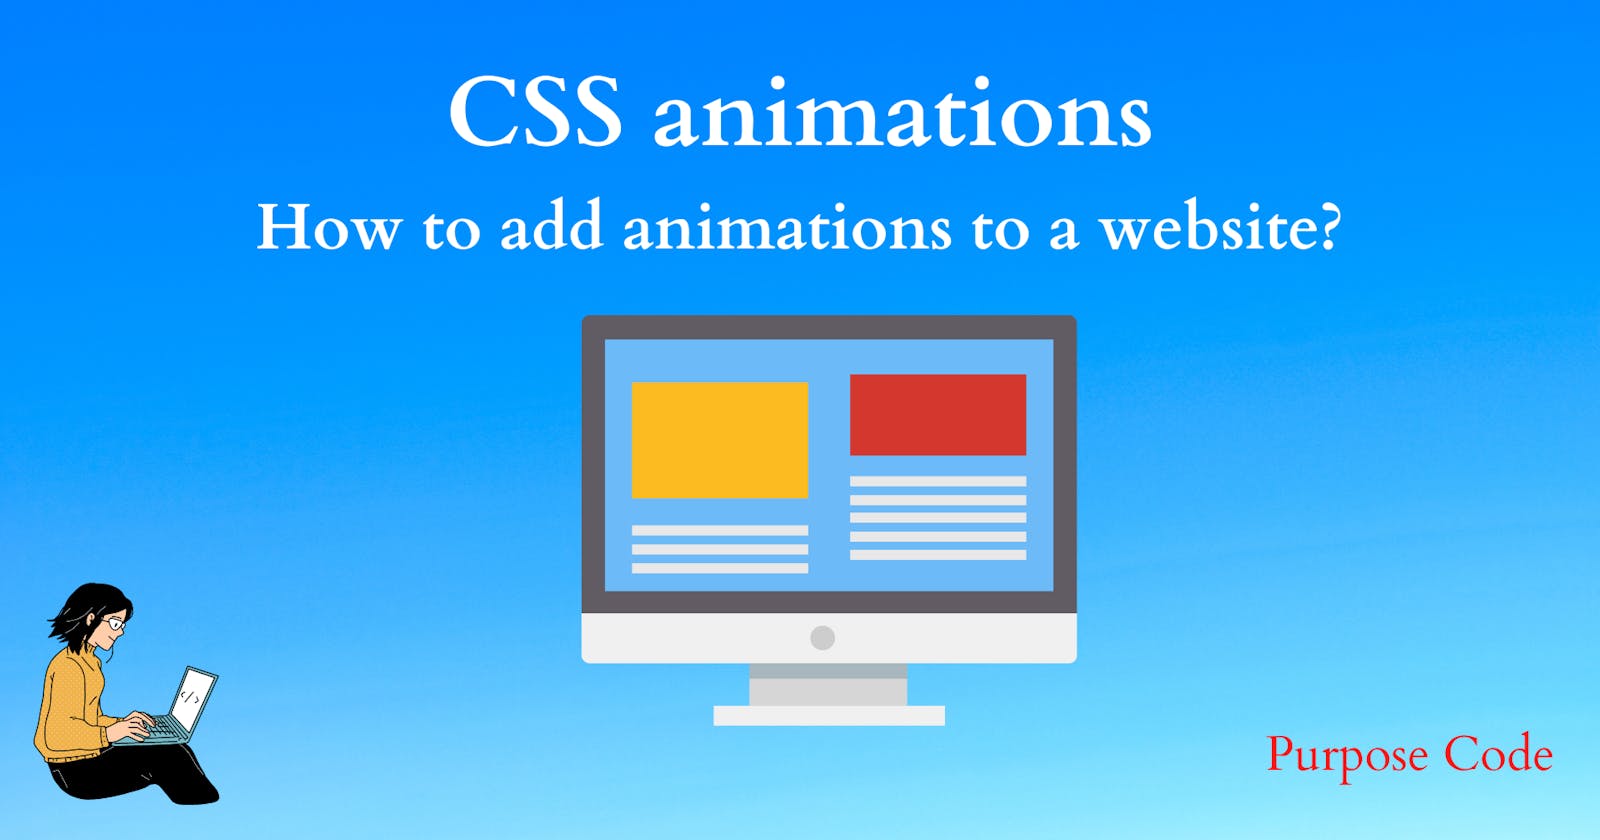 How to add animations to a website?